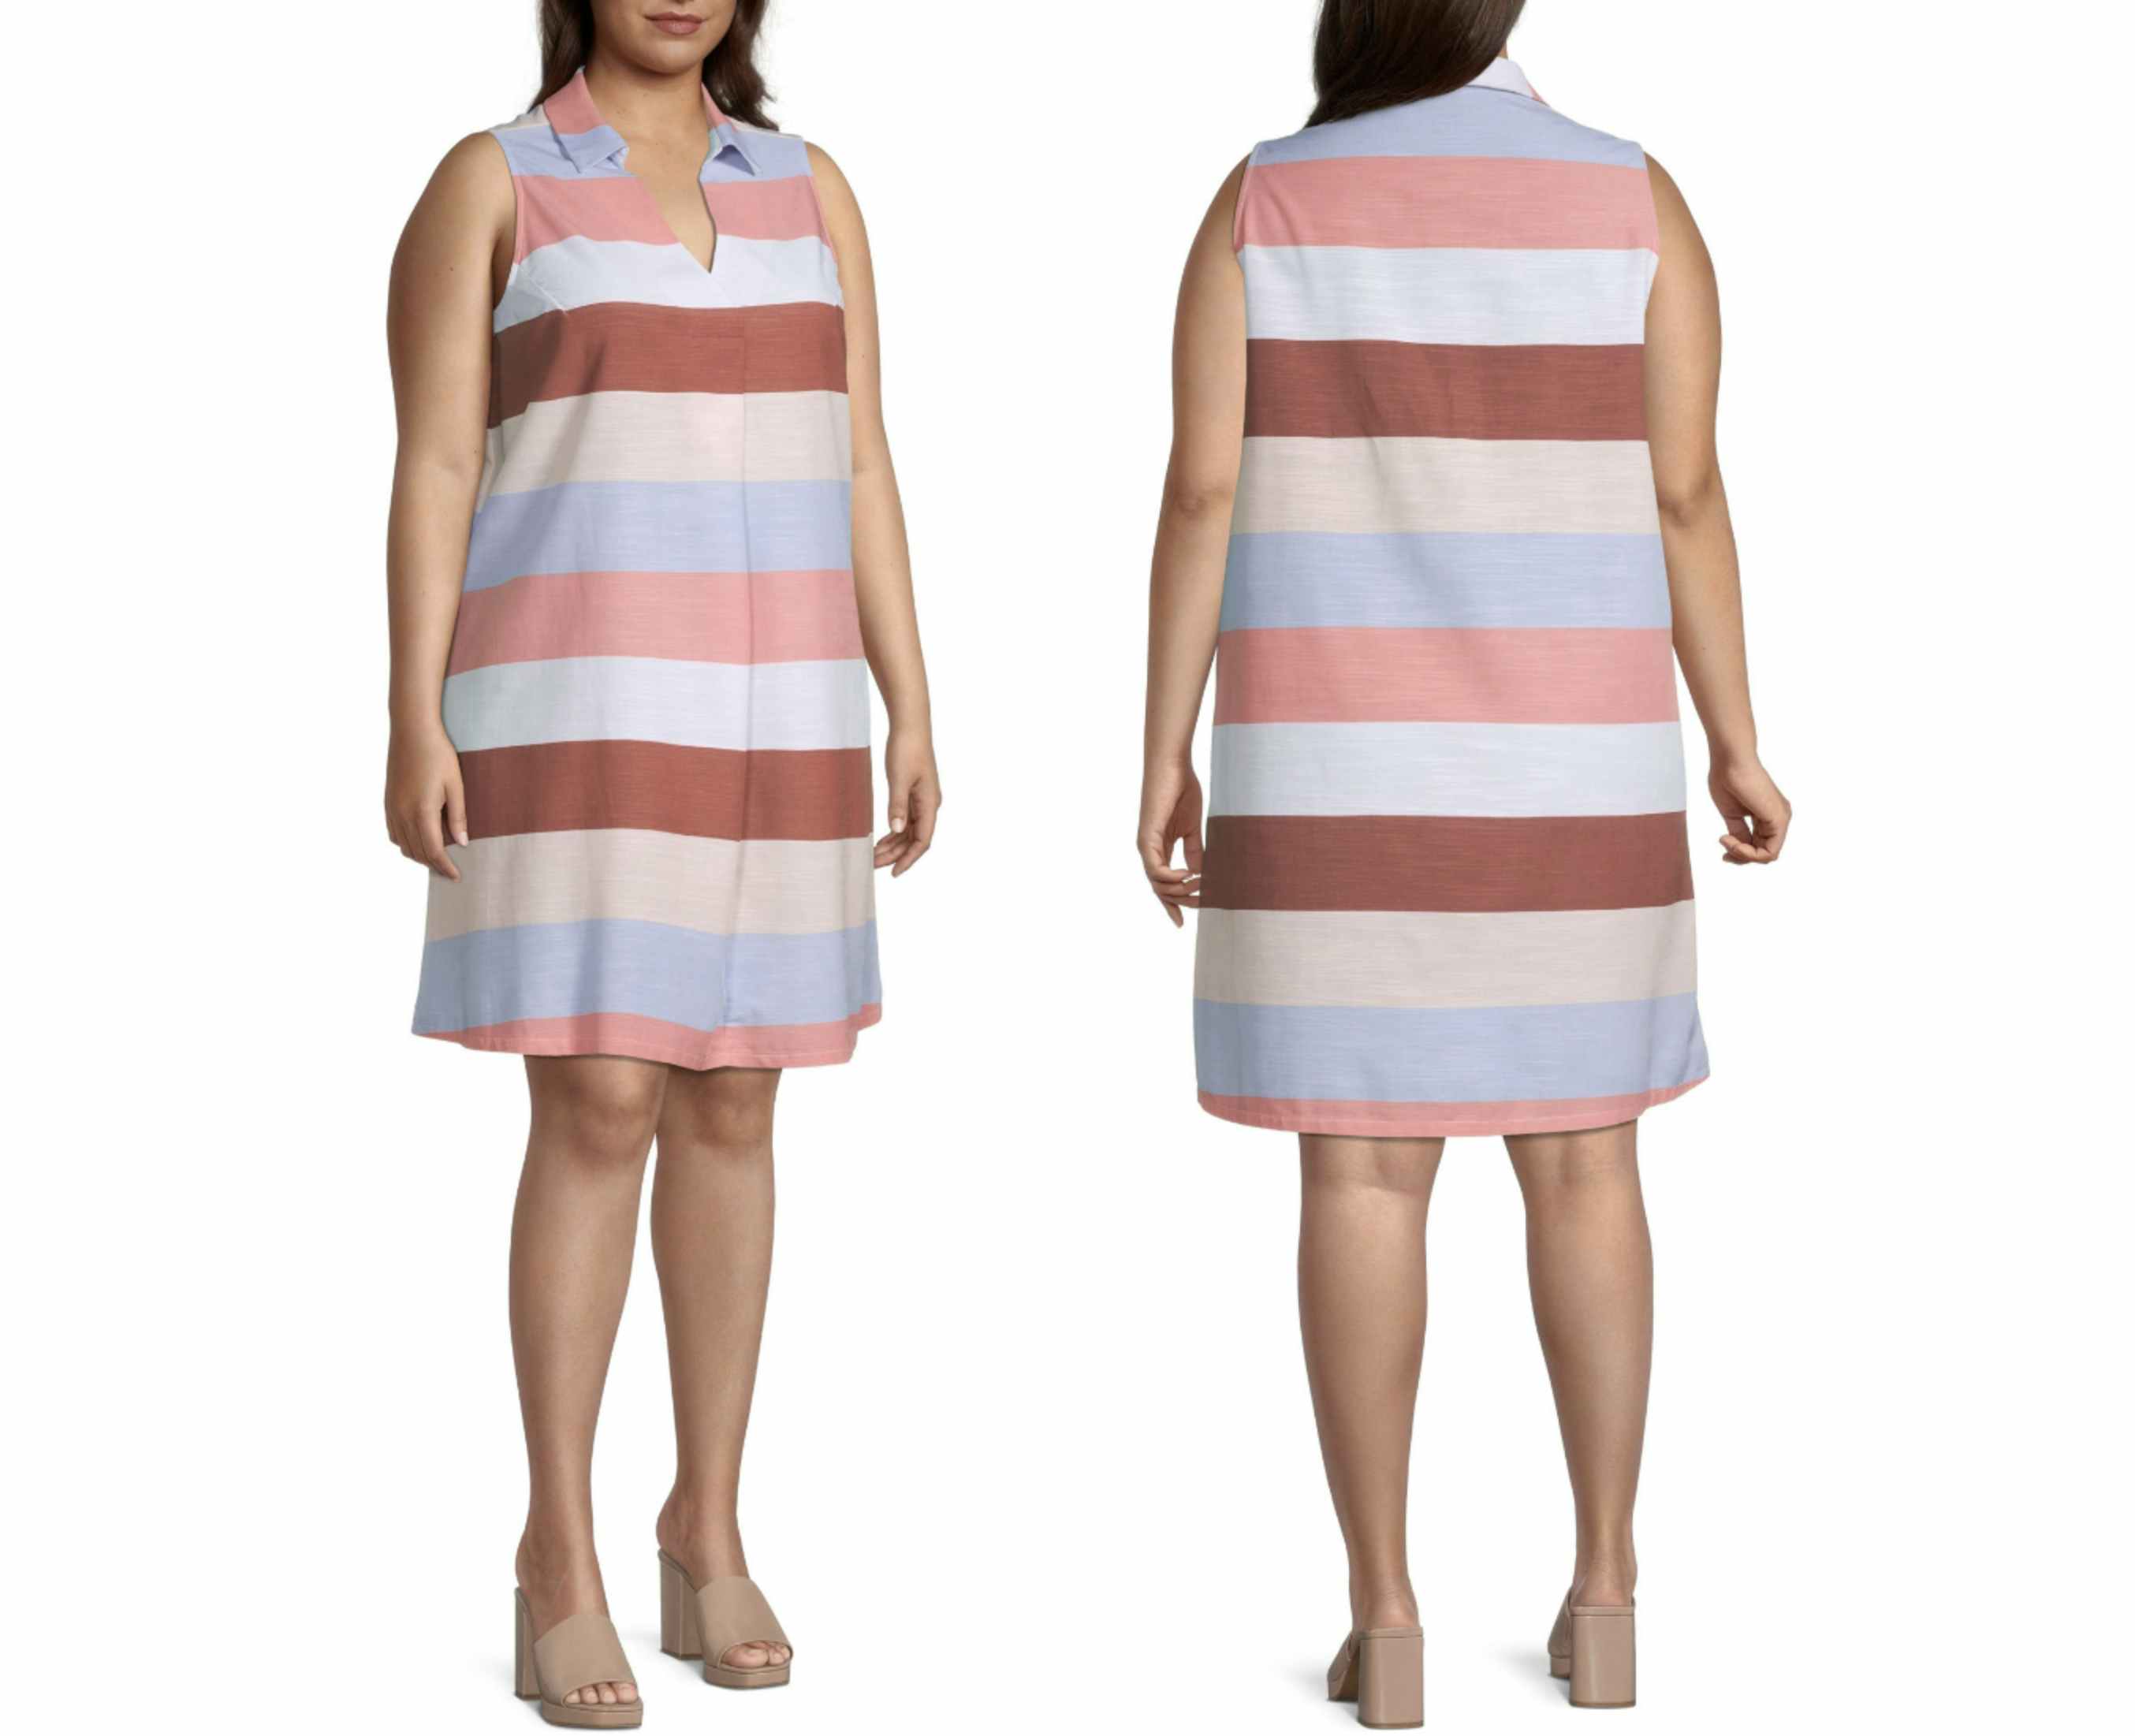 A JCPenney model wearing a Liz Claiborne Sleeveless Striped A-Line Dress Plus on a white background.